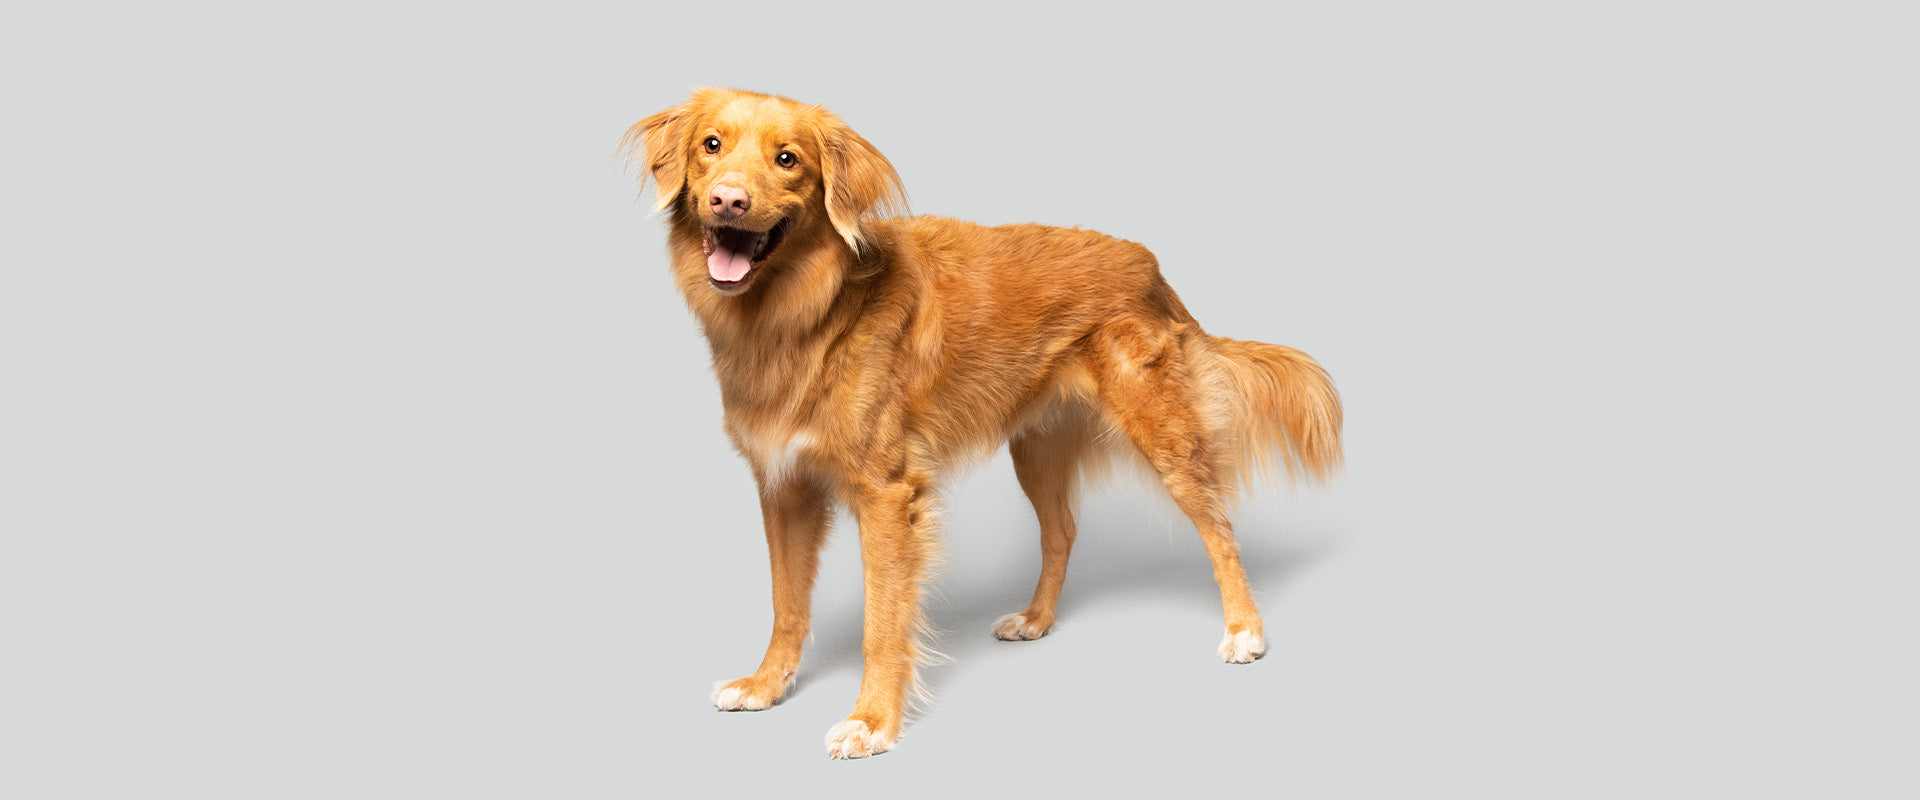 A golden dog standing against a light grey background, looking directly at the camera with its mouth open and tongue out, appearing happy and attentive.